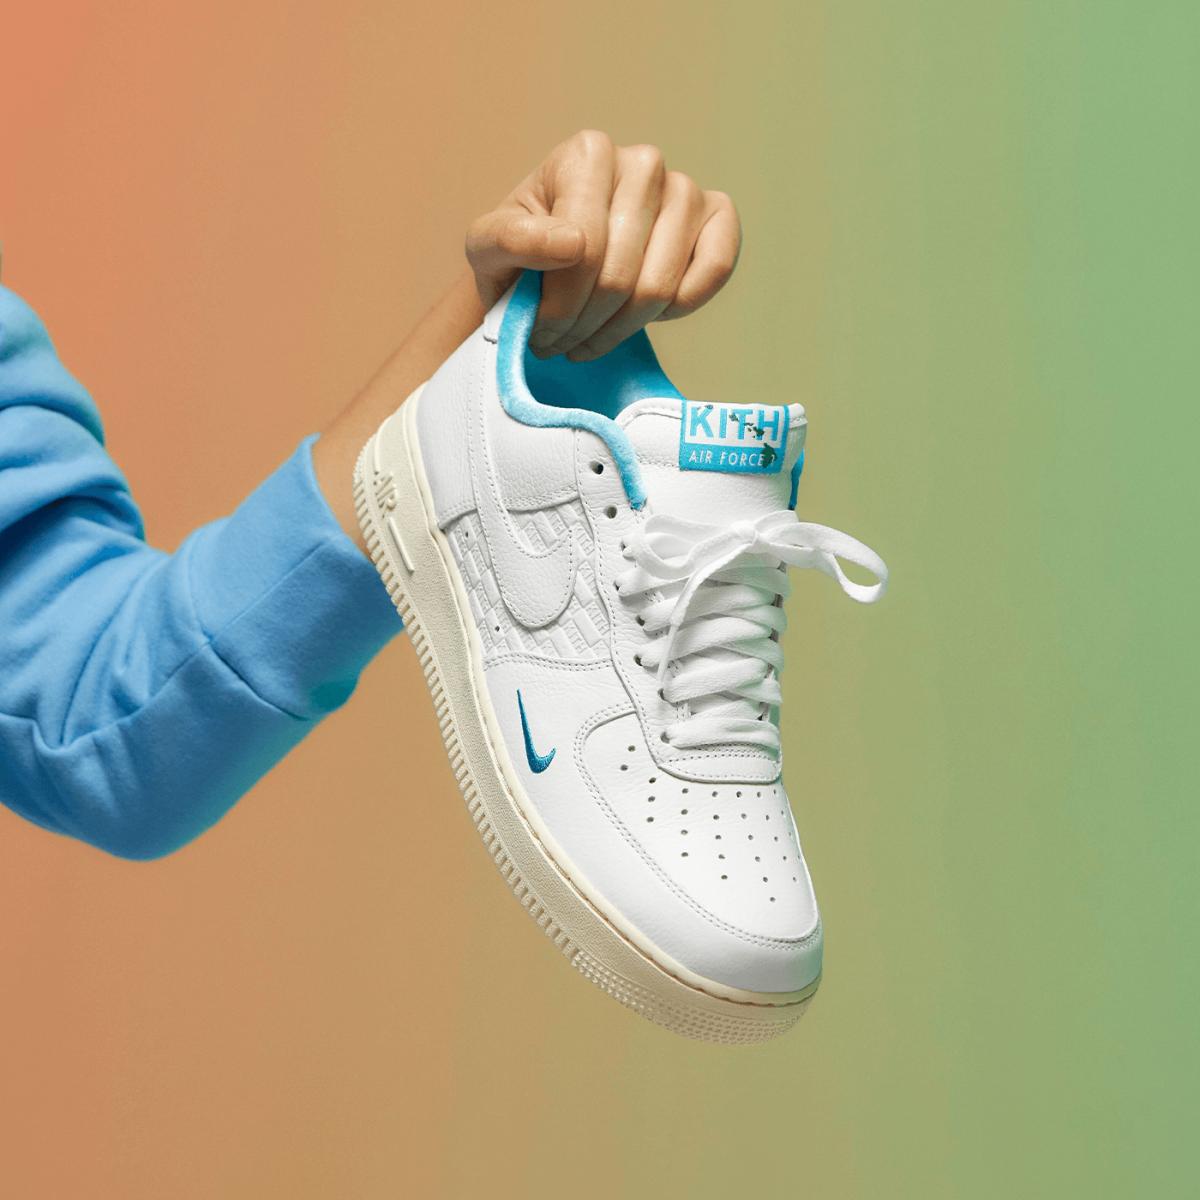 The Best Nike AF1 Colourways & Collabs on StockX - StockX News